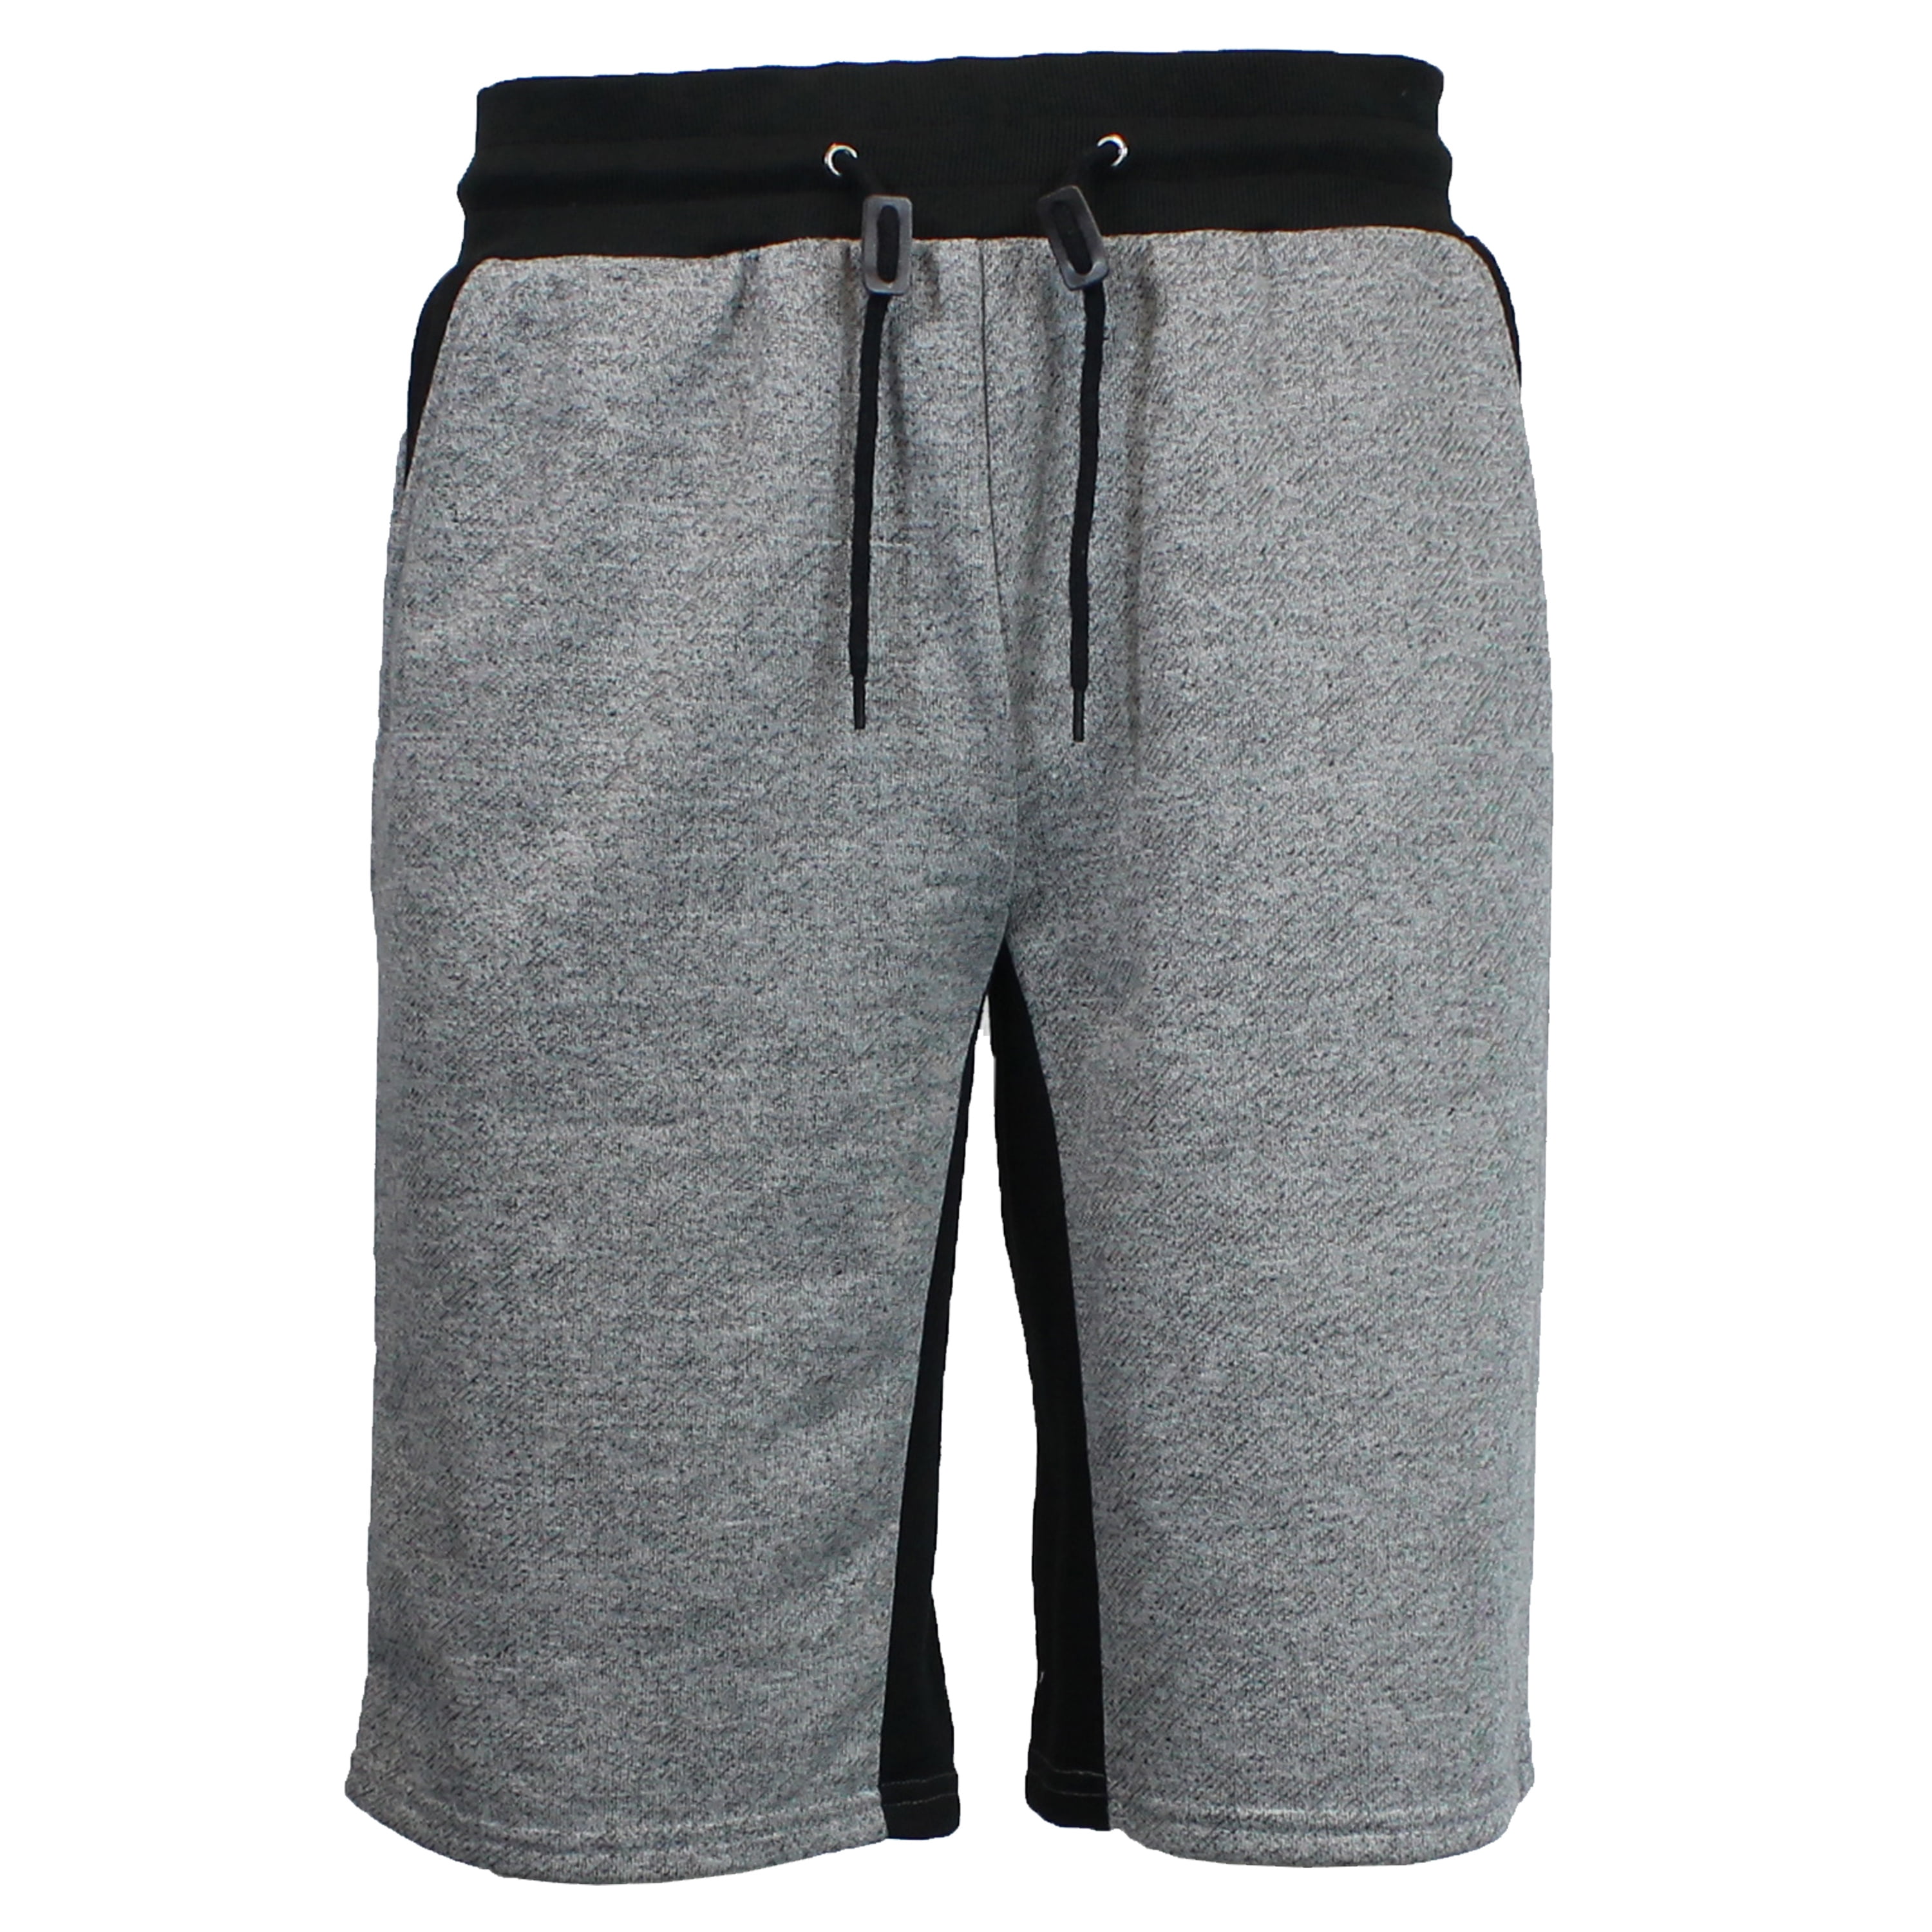 Men's Marled French Terry Shorts with Contrast Pockets | Walmart Canada